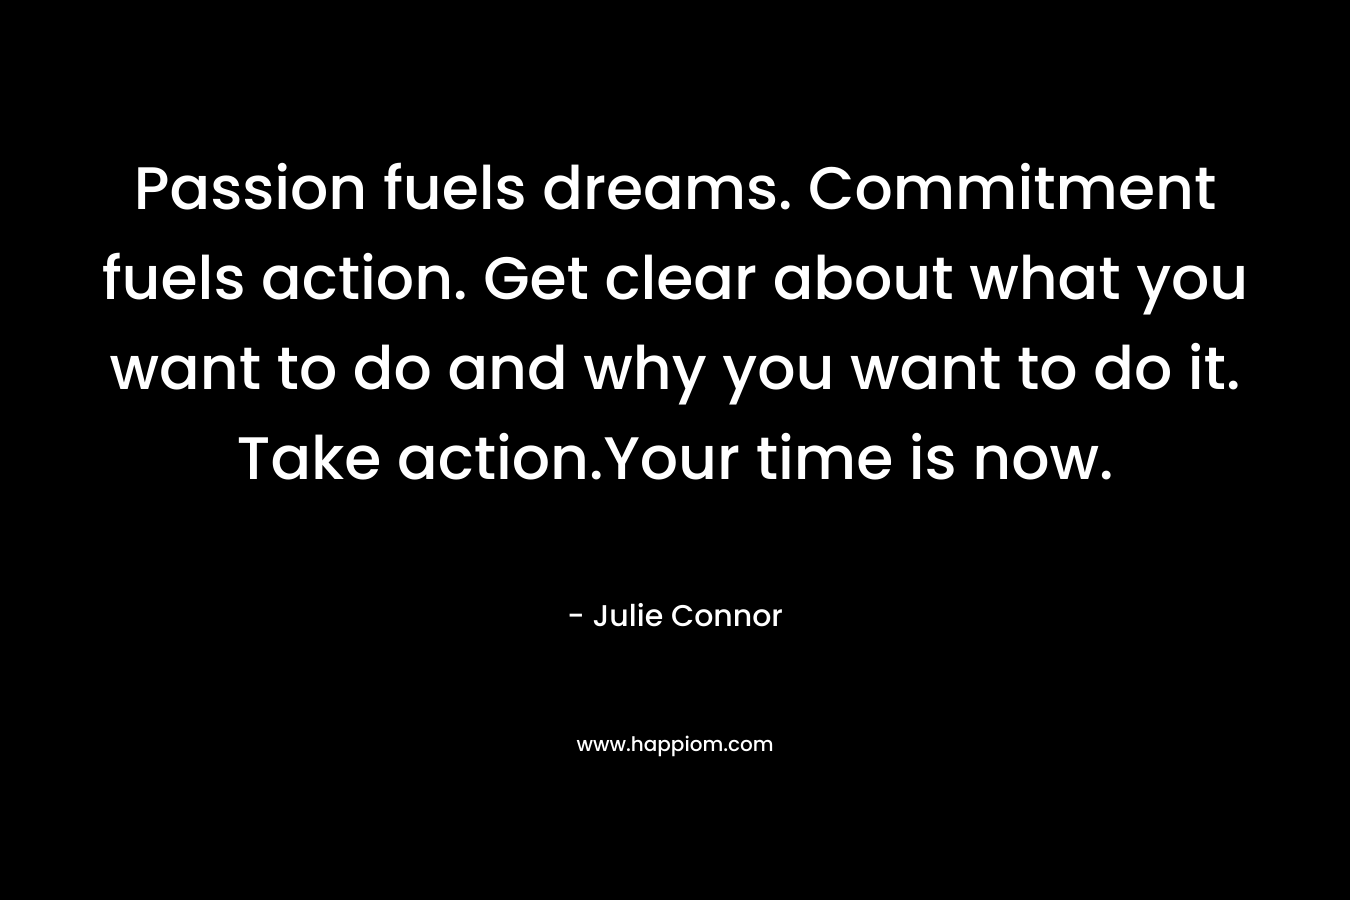 Passion fuels dreams. Commitment fuels action. Get clear about what you want to do and why you want to do it. Take action.Your time is now.